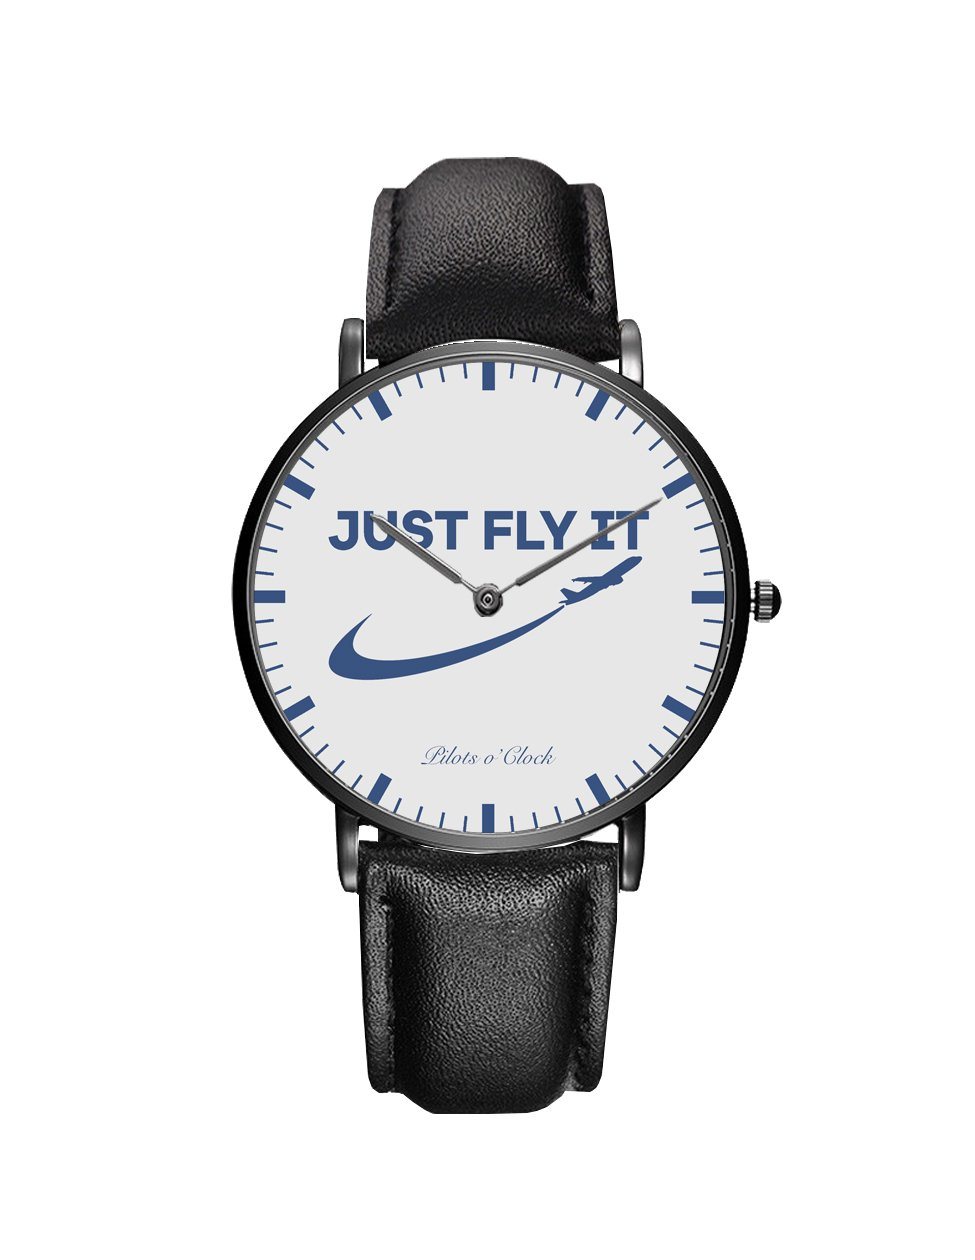 Just Fly It 2 Leather Strap Watches Pilot Eyes Store Black & Black Leather Strap 